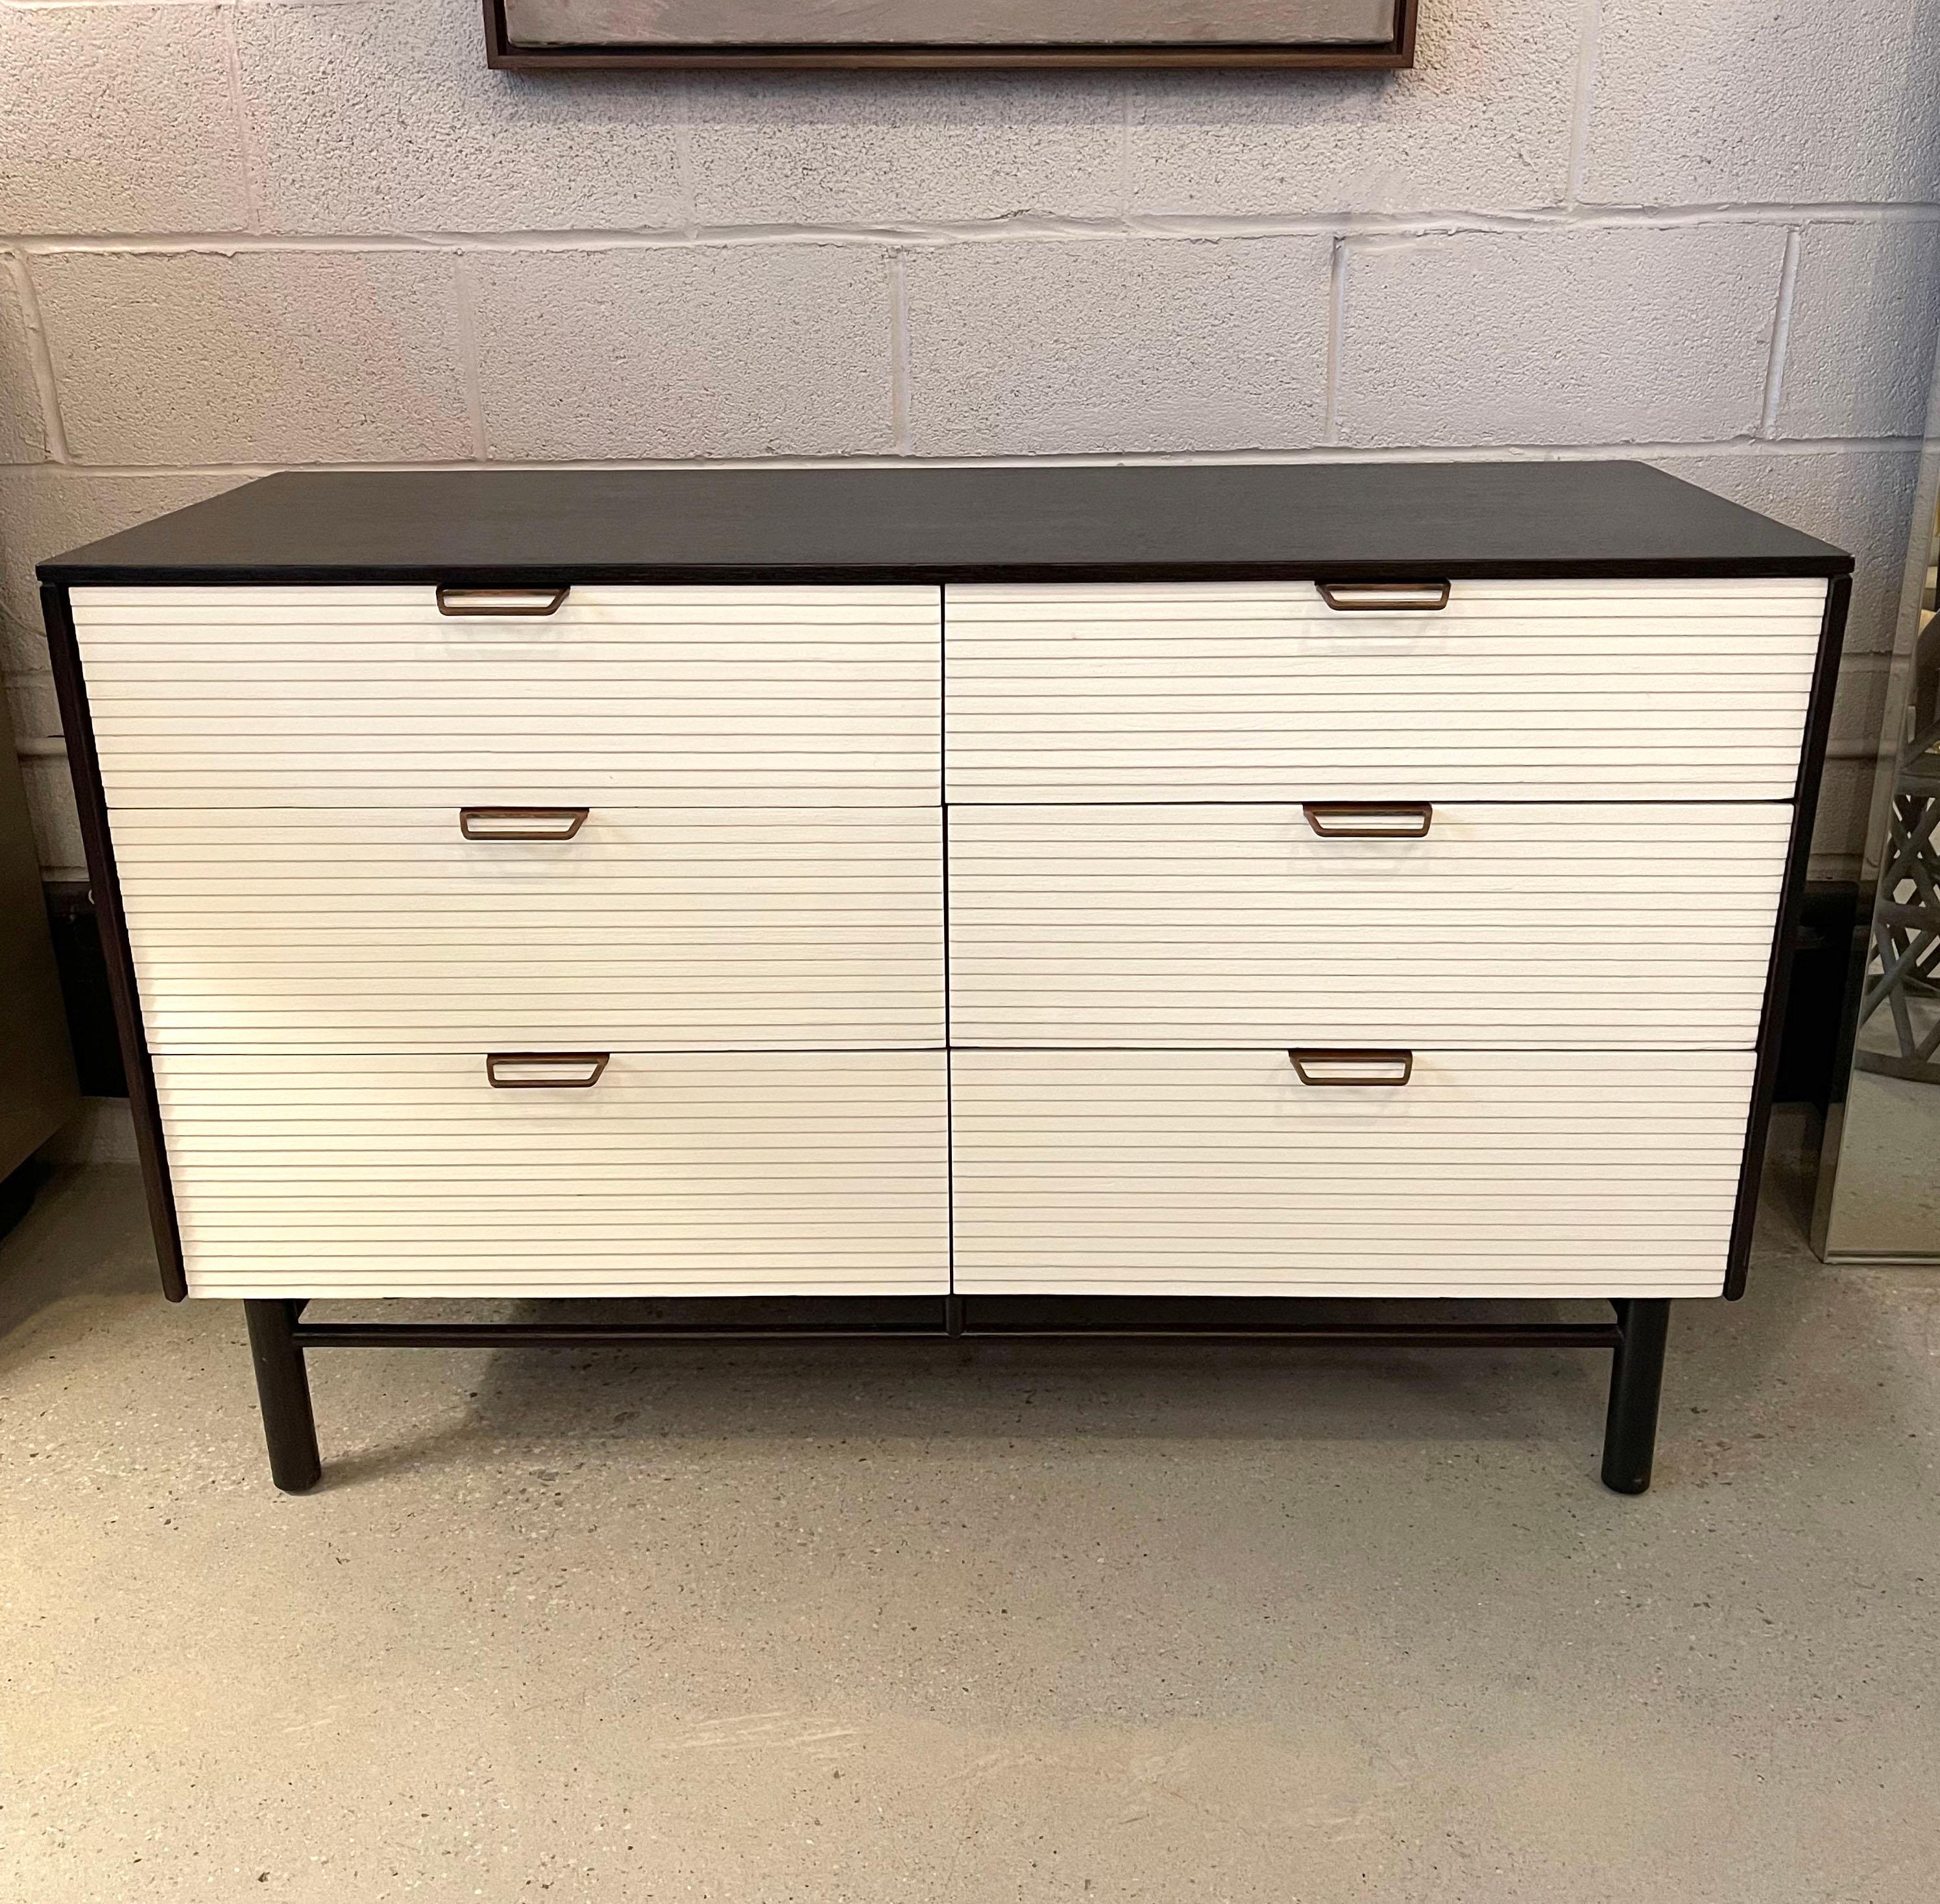 Mid-Century Modern, double-wide, oak, 6 drawer dresser by Raymond Loewy for Mengel Furniture Co. features an ebonized finish with contrasting white, louvered drawers with brass handles.